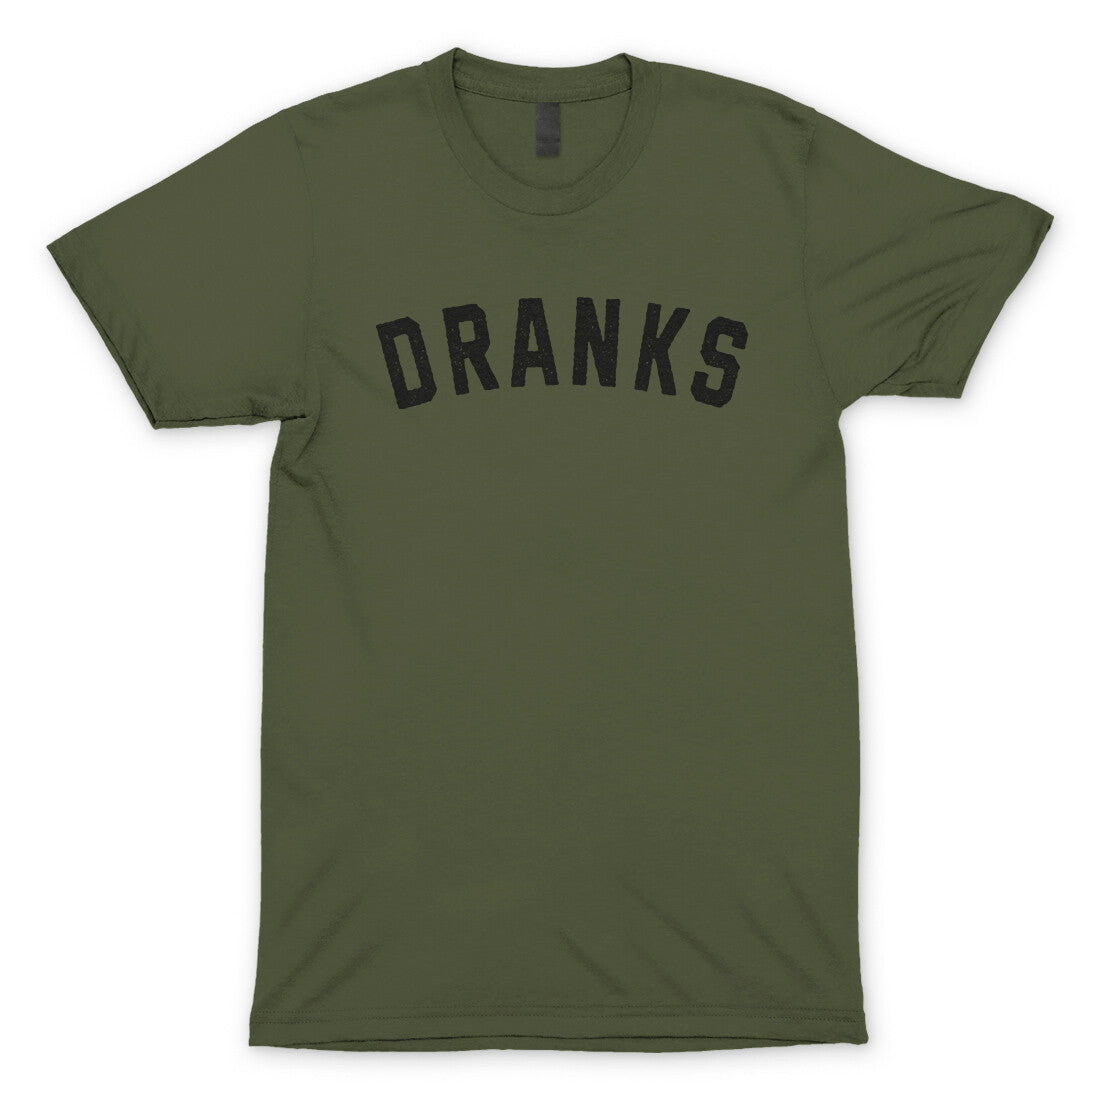 Dranks in Military Green Color